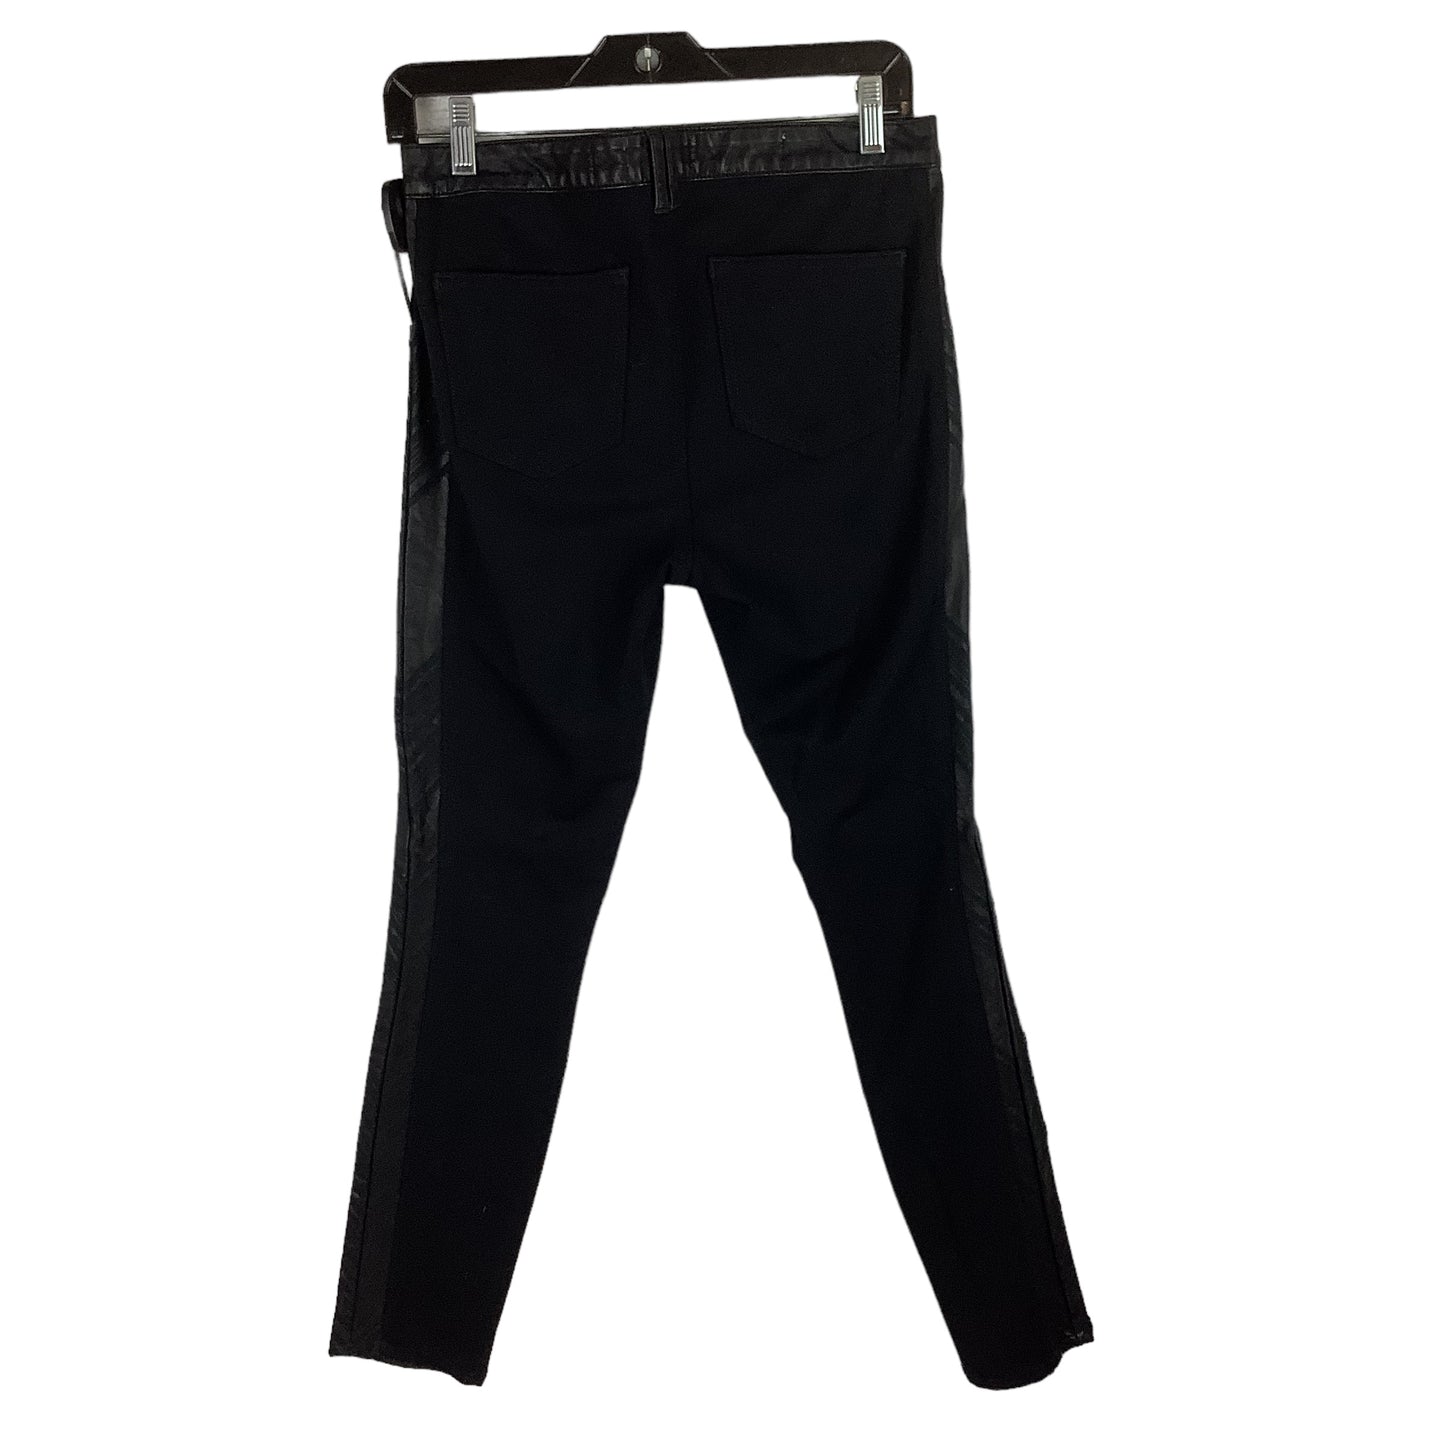 Pants Ankle By Pilcro  Size: 6 (28)